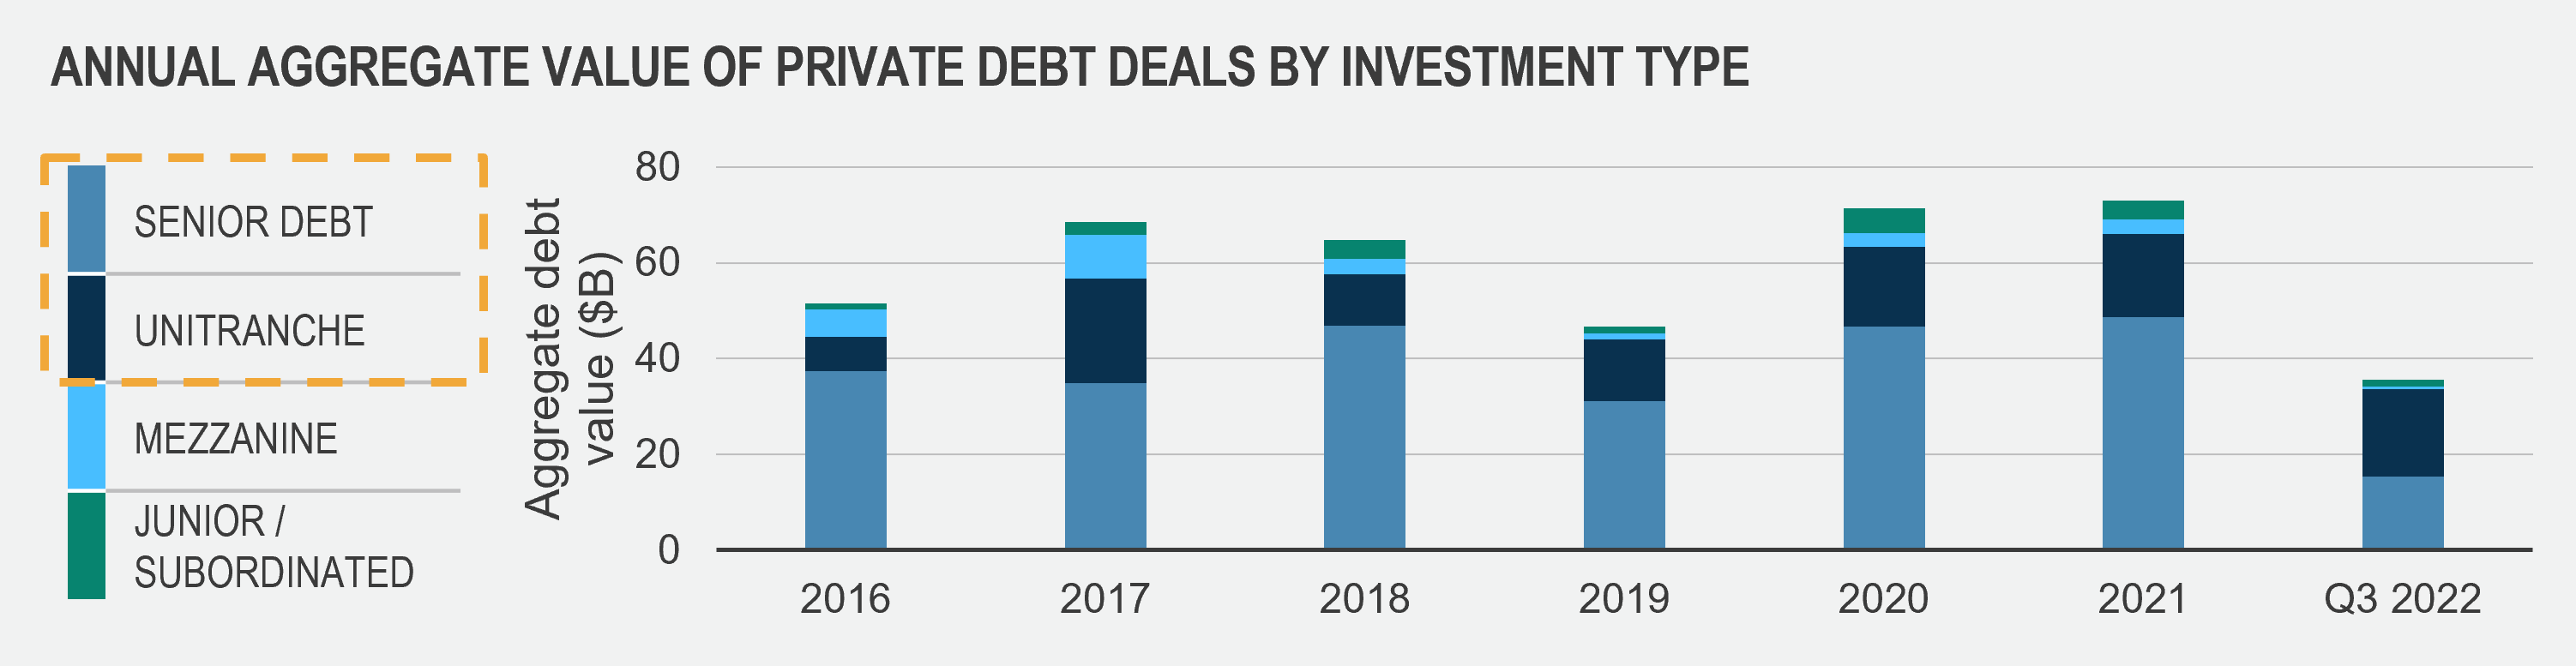 Annual aggregate value of private debt deals by investment type from 2016 to q3 2022.